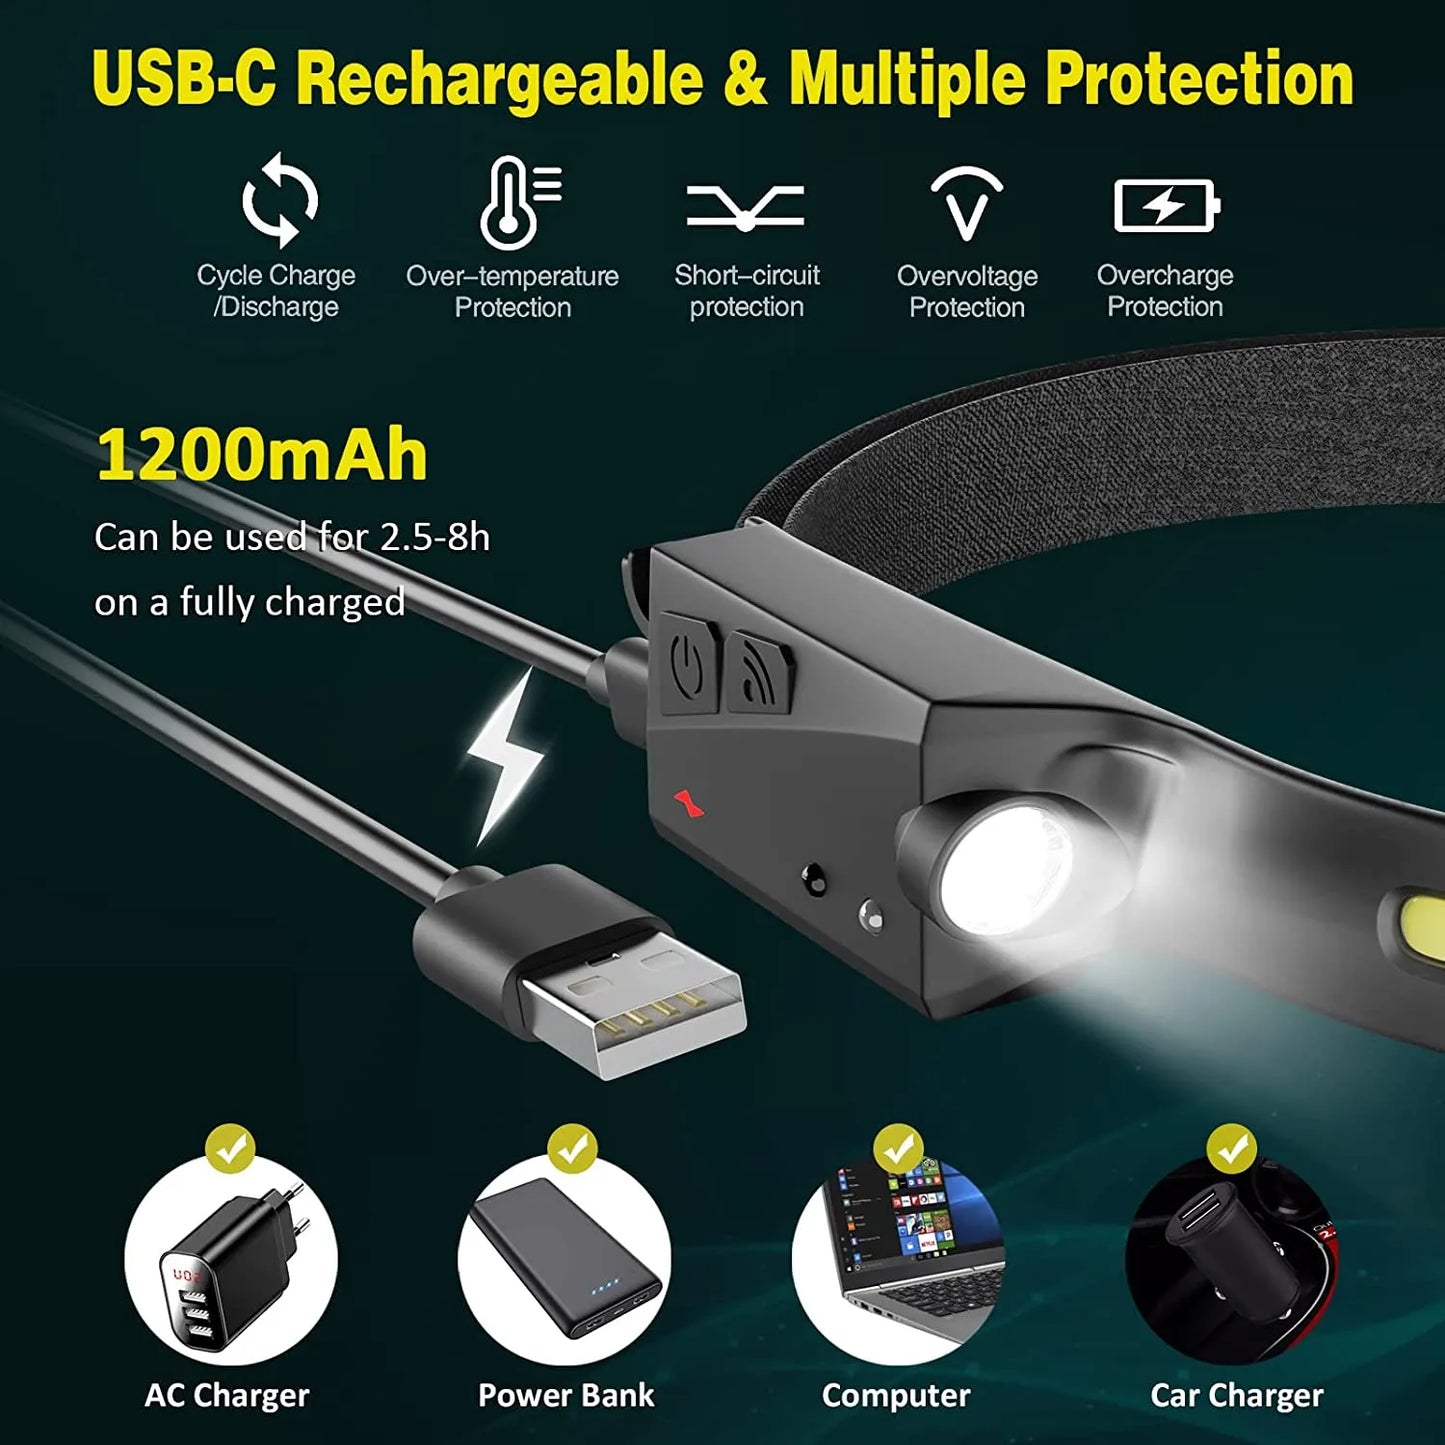 Advanced USB Rechargeable LED Sensor Headlamp: Ultimate Lighting for Outdoor Adventures & Home Projects